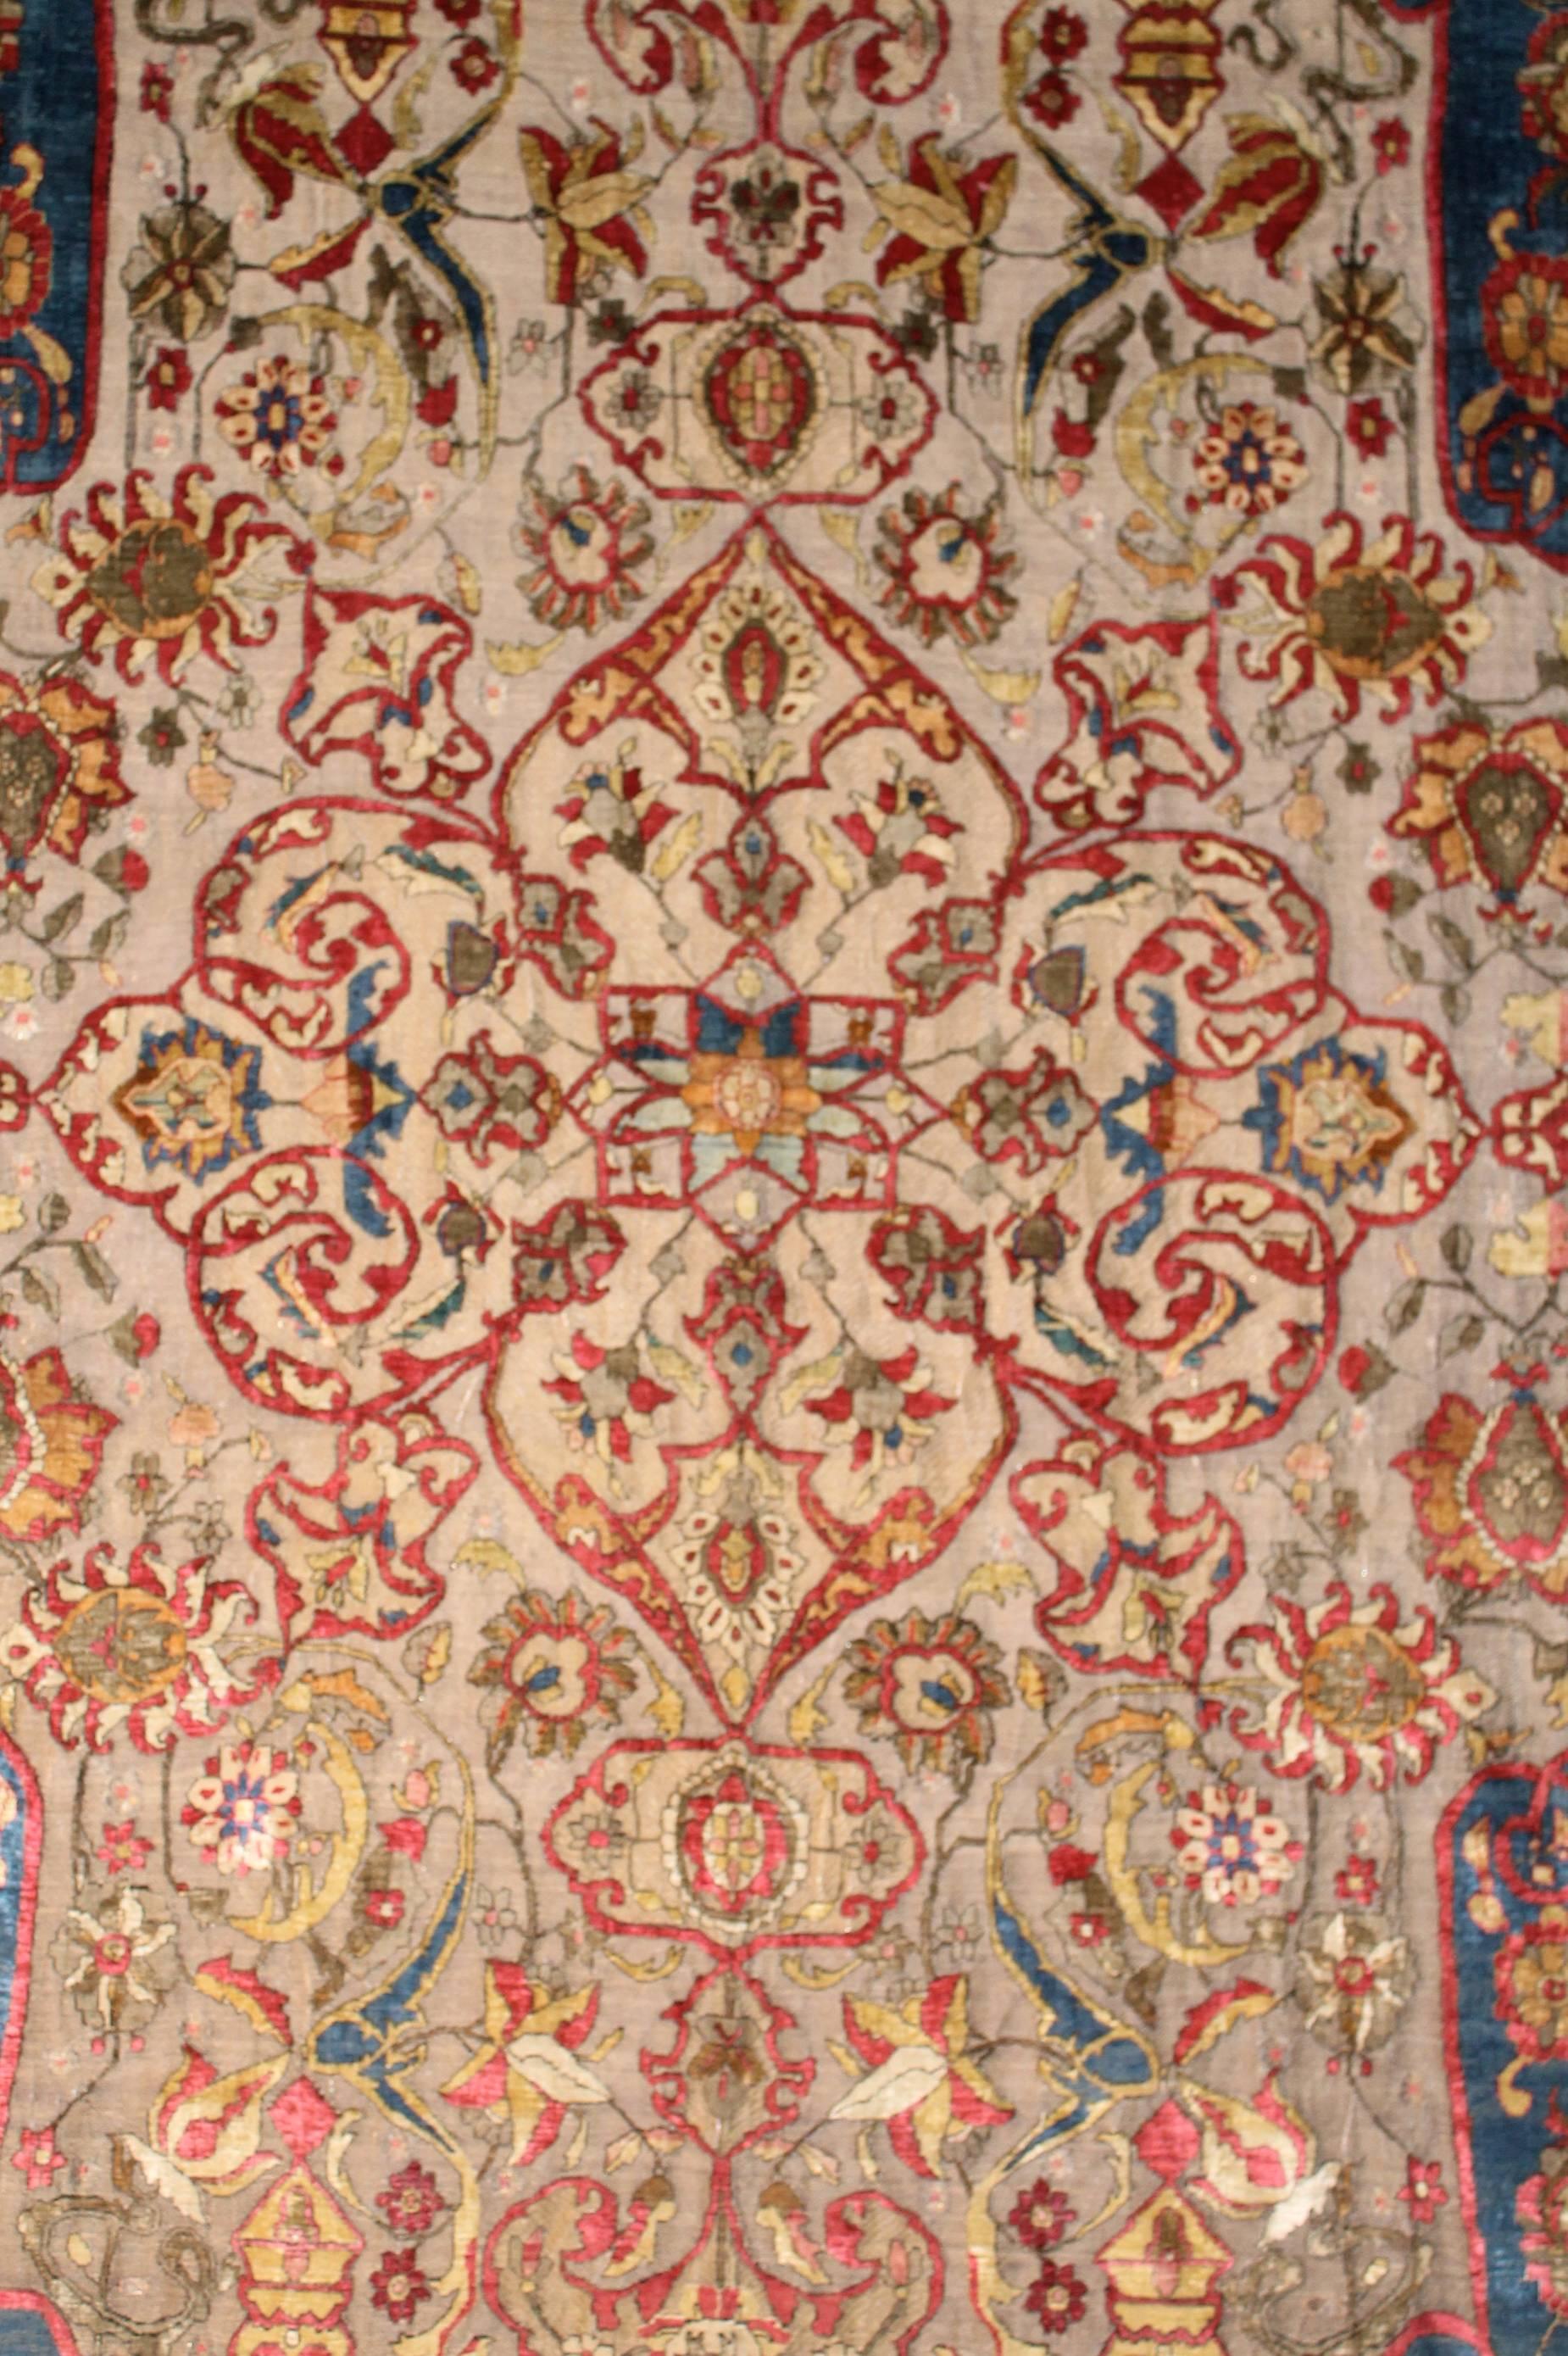 Beautifully silk and metal combined woven antique Souf Kashan.
This carpet is made in 1850-1880 in Iran Kashan.
Colors are amazing and the quality of the silk used is unbelievable.
For my knowledge is ready to go to a museum.